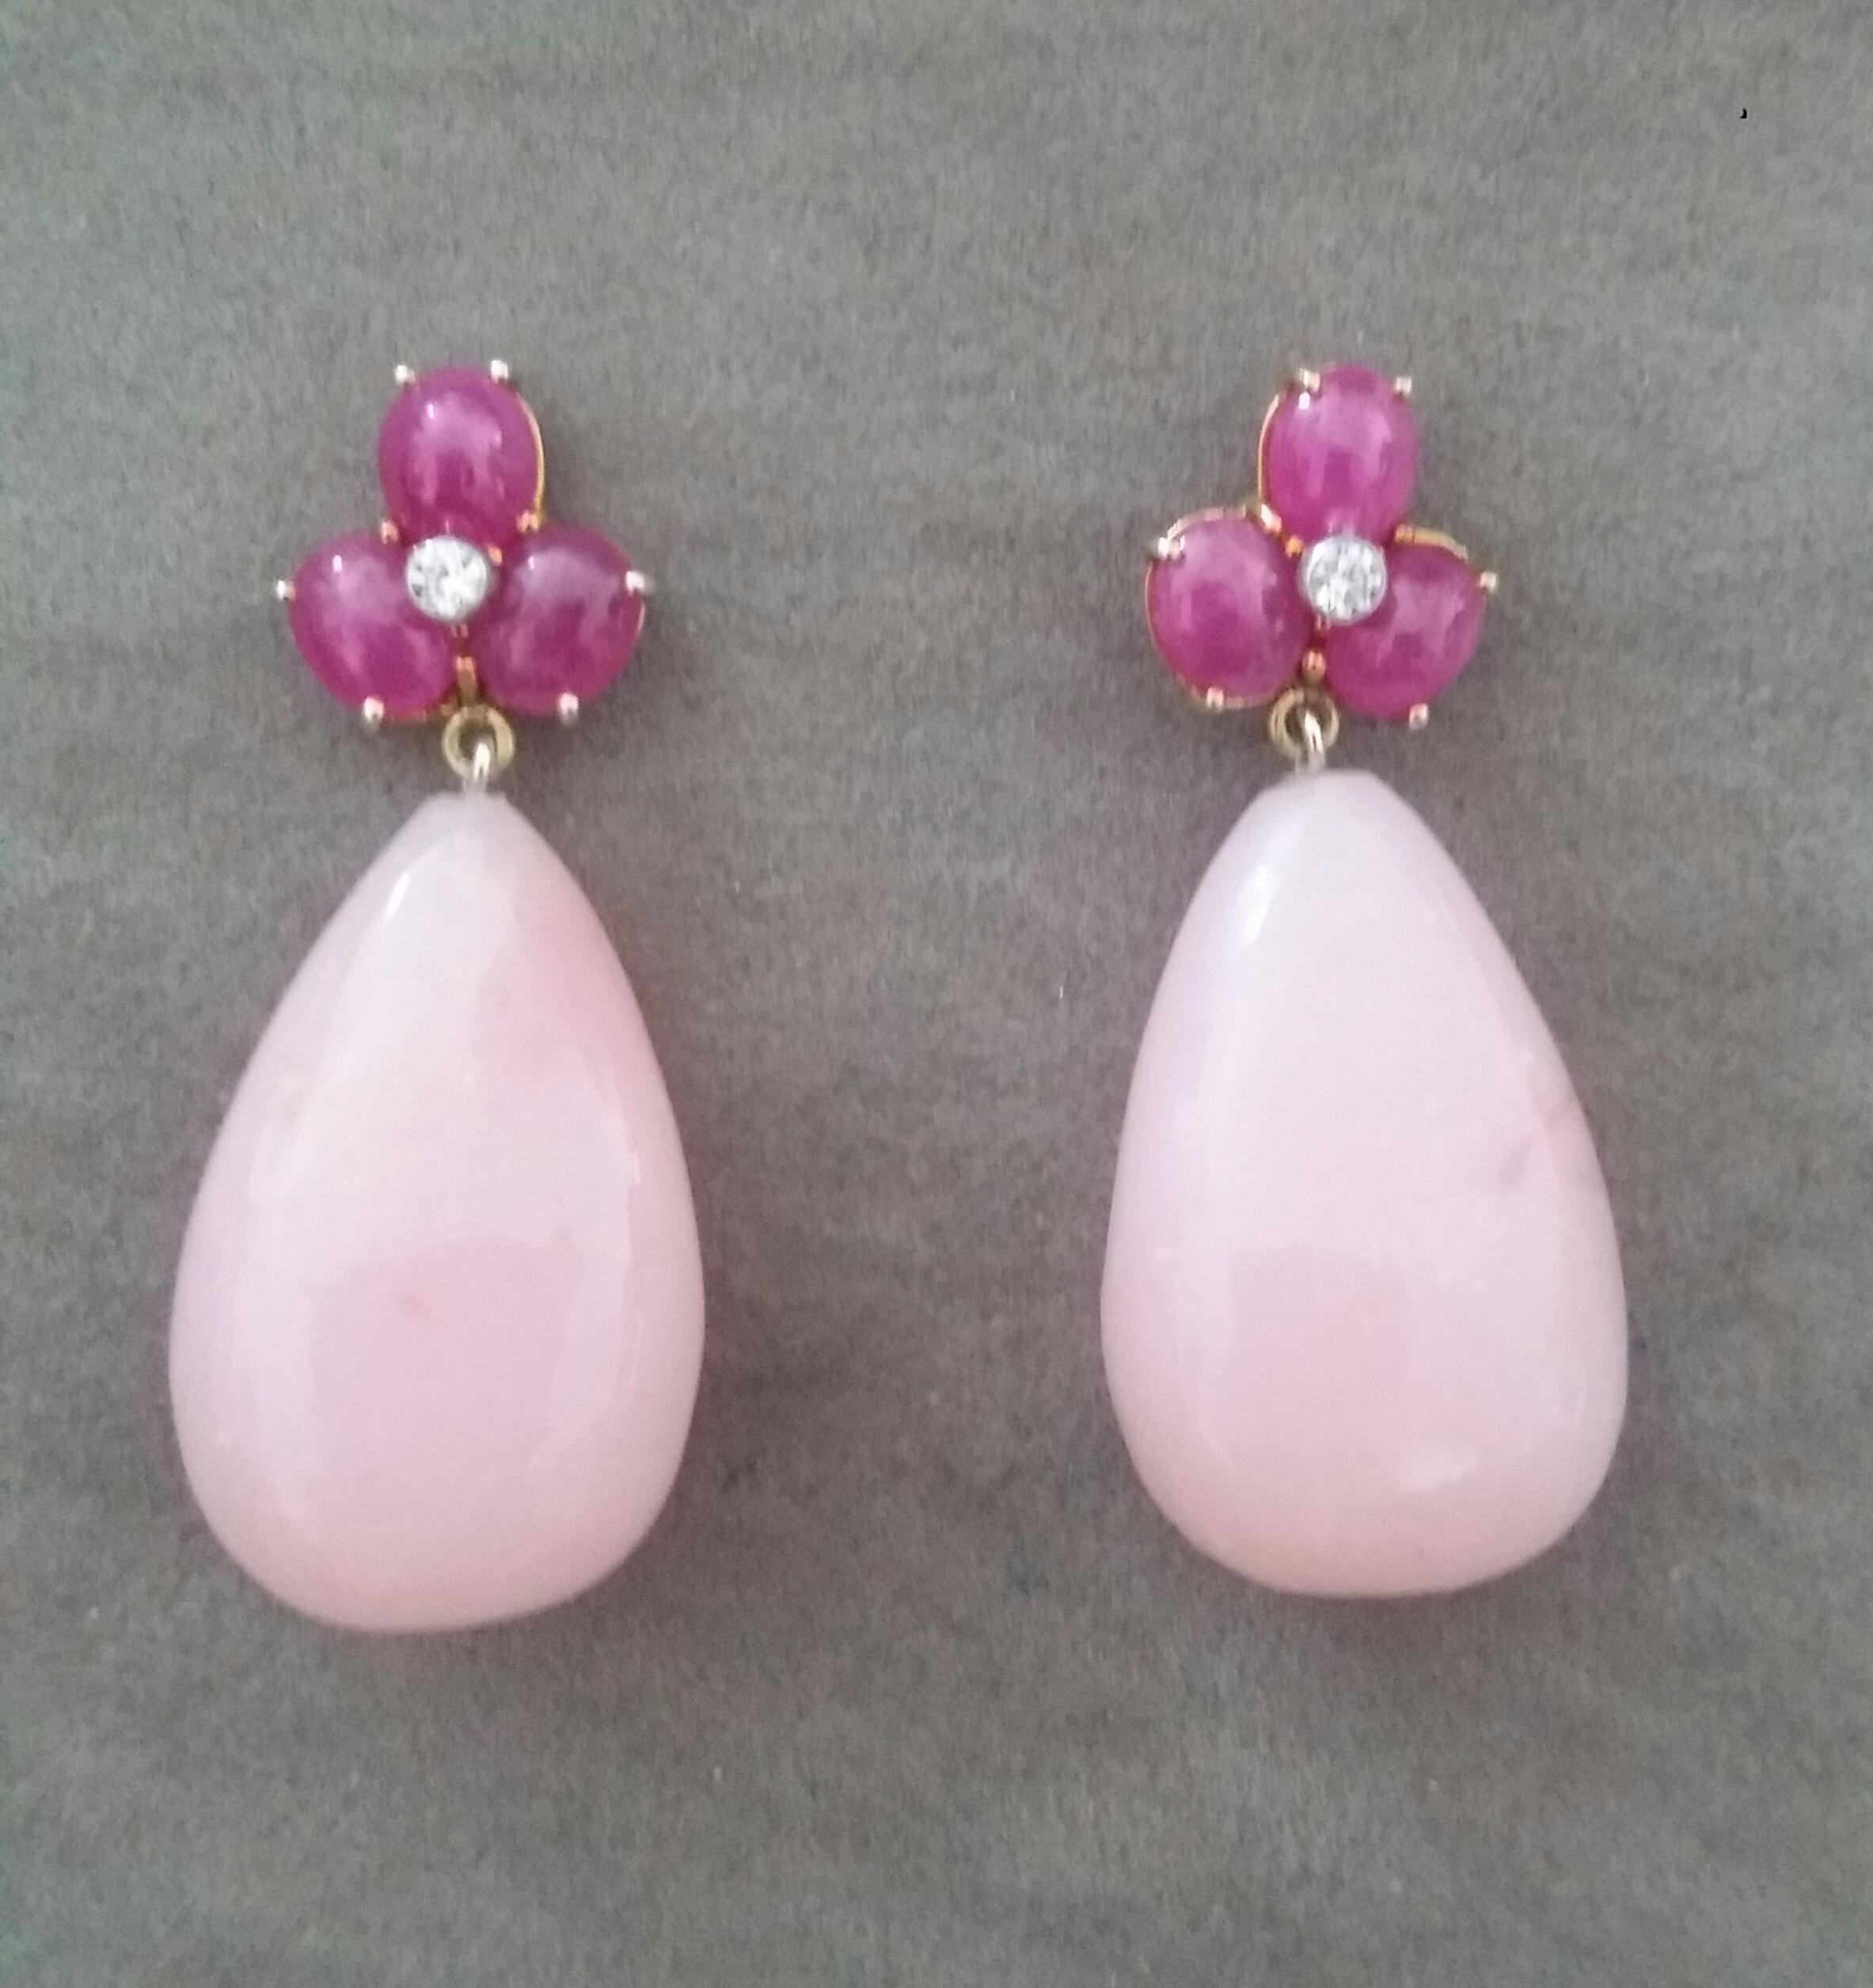 Elegant and completely handmade Earrings consisting of an upper part of 3 oval shape Ruby cabs of 4 mm x 5 mm set together in 14 Kt yellow gold with 2 small diamonds in the center, at the bottom 2 nice big size Pear Shape Natural Pink Opals 